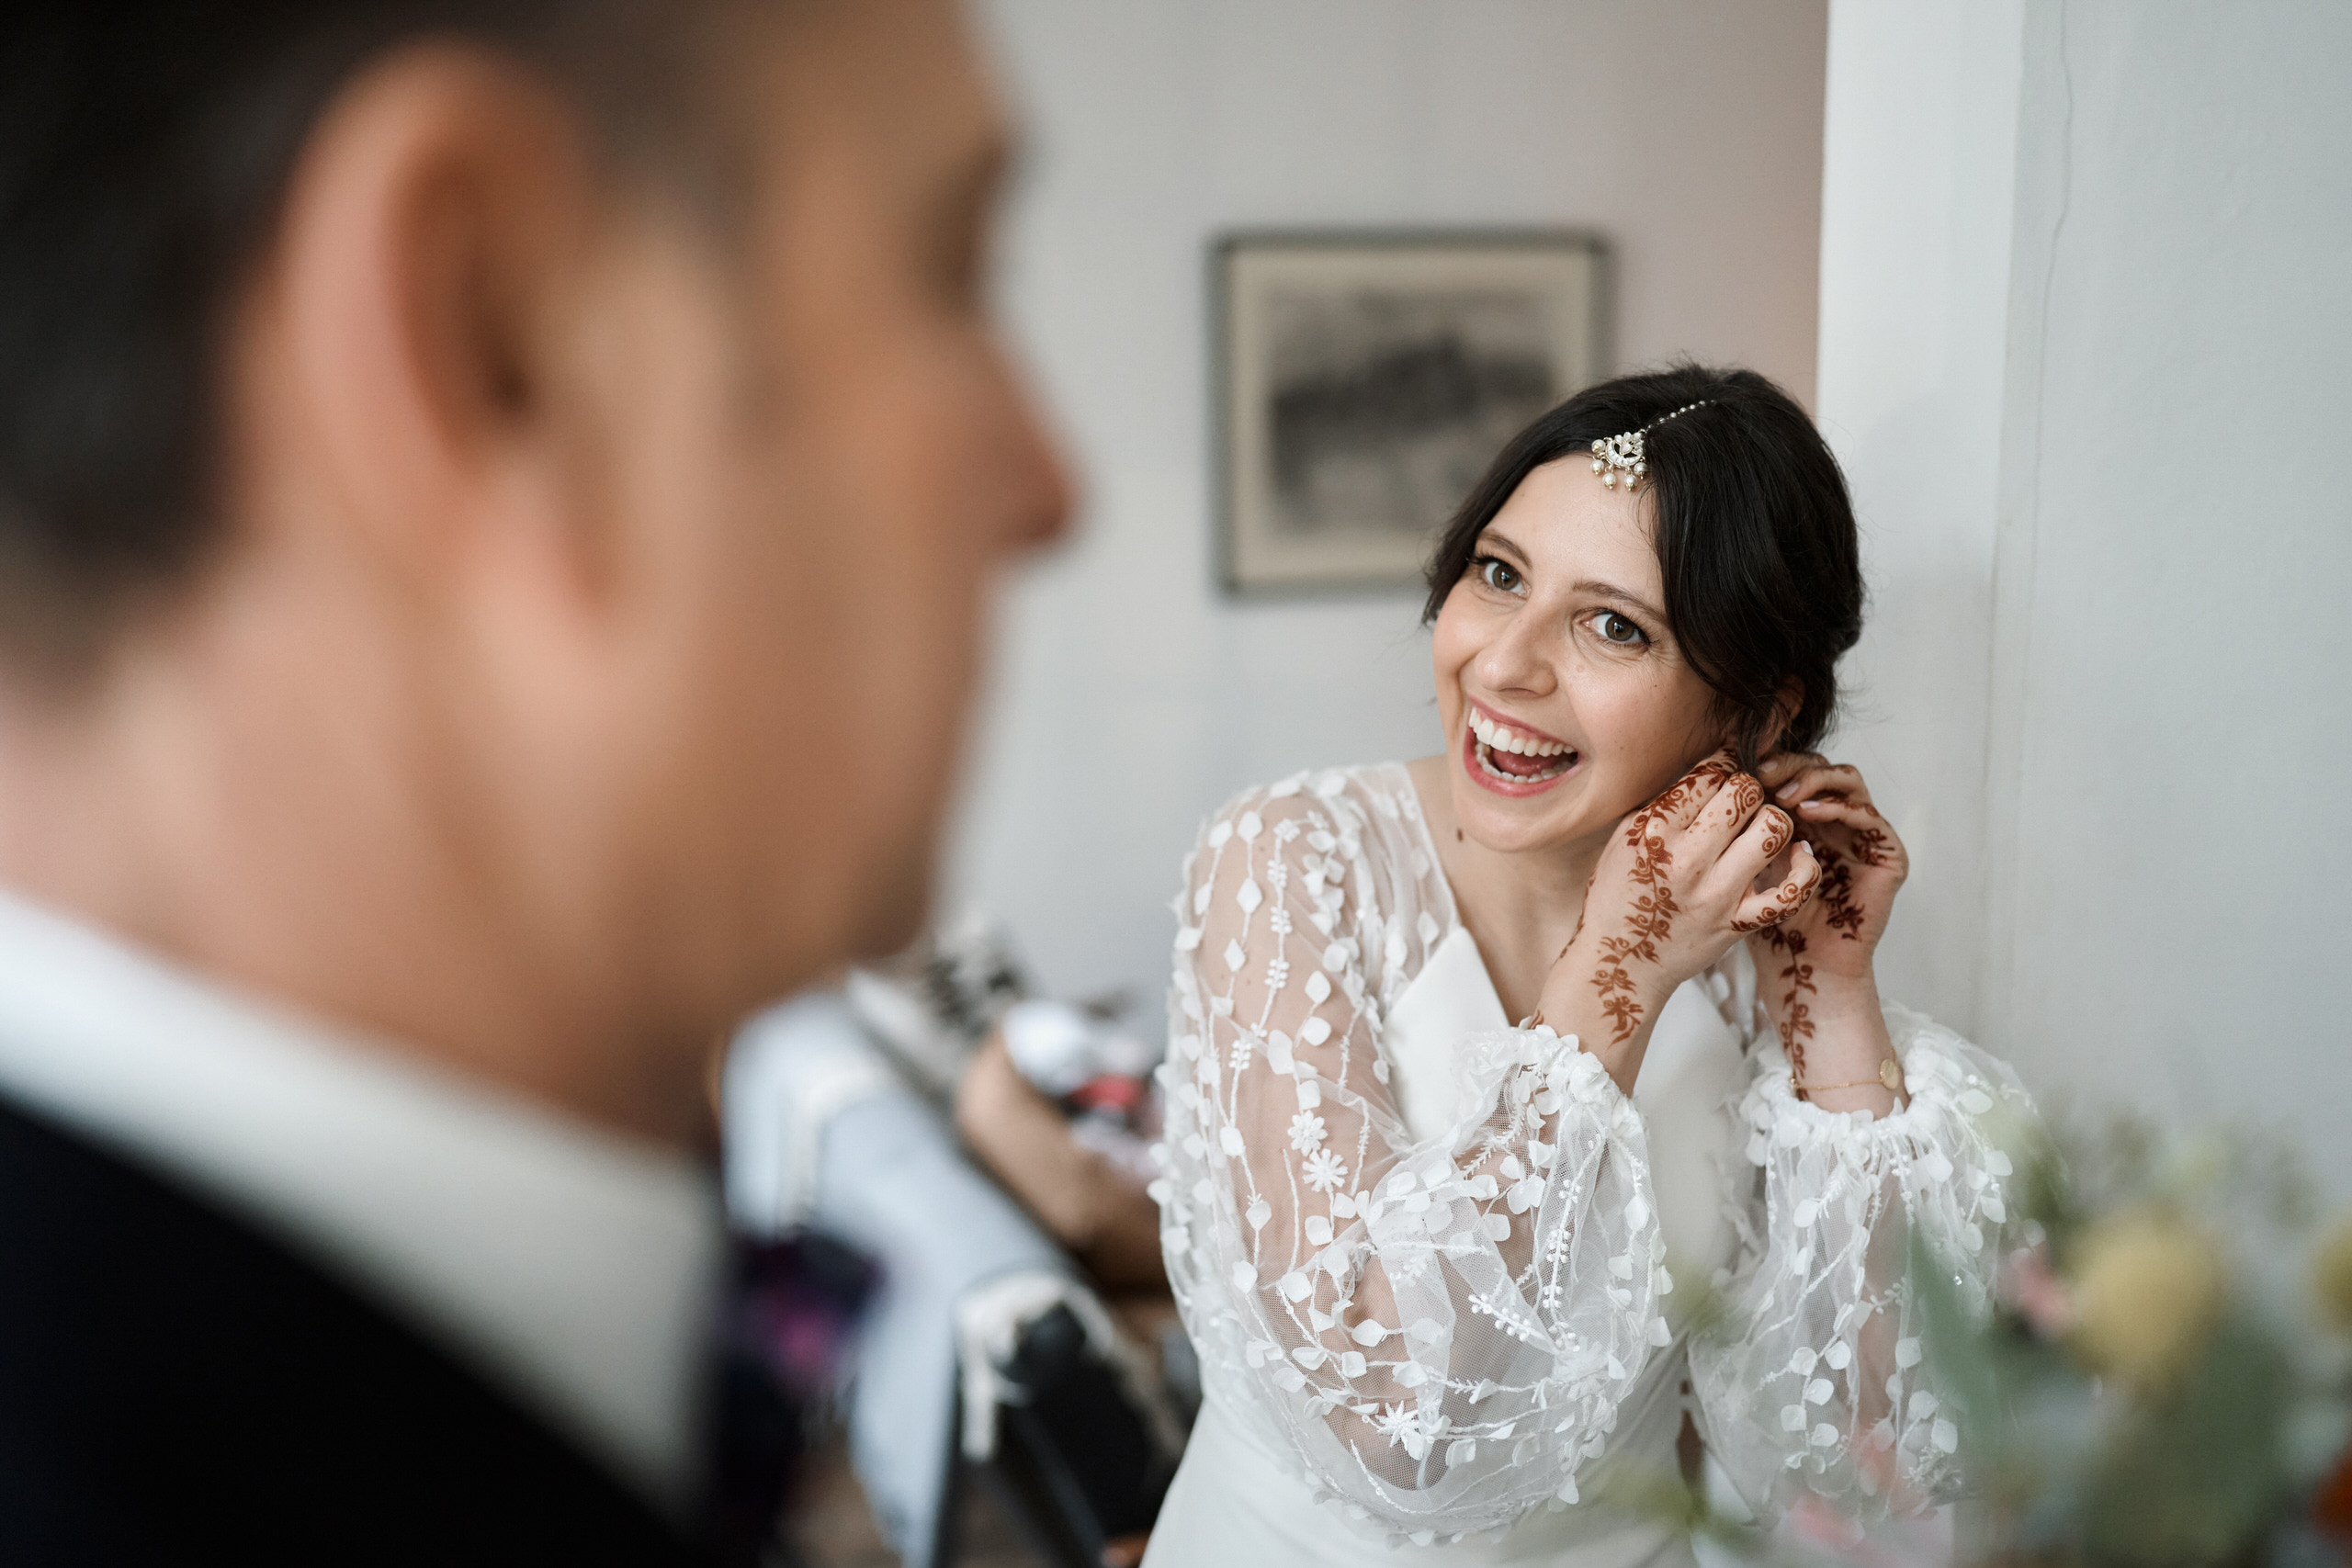 A bride is grinning as she looks at herself in the mirror.